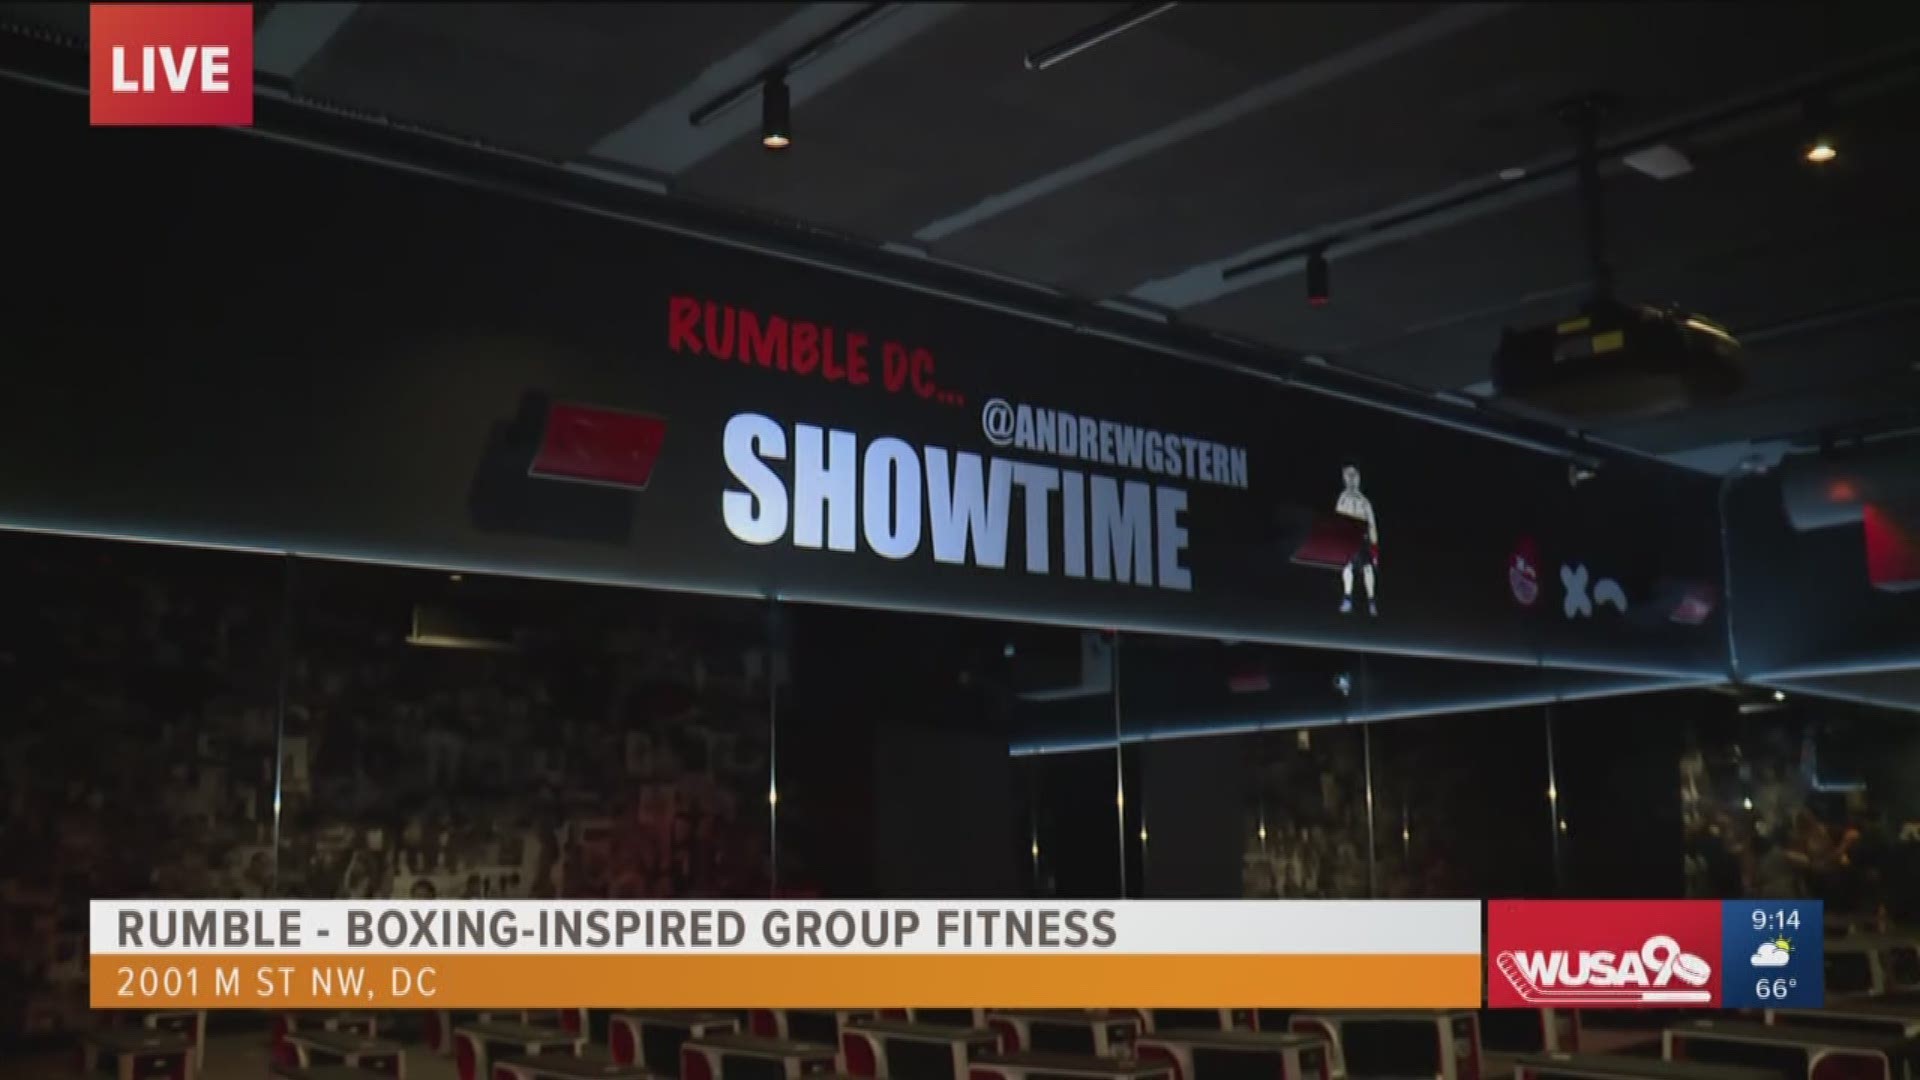 Rumble Boxing has just opened in DC and Andi Hauser gets the inside scoop on the boxing-inspired group fitness class.